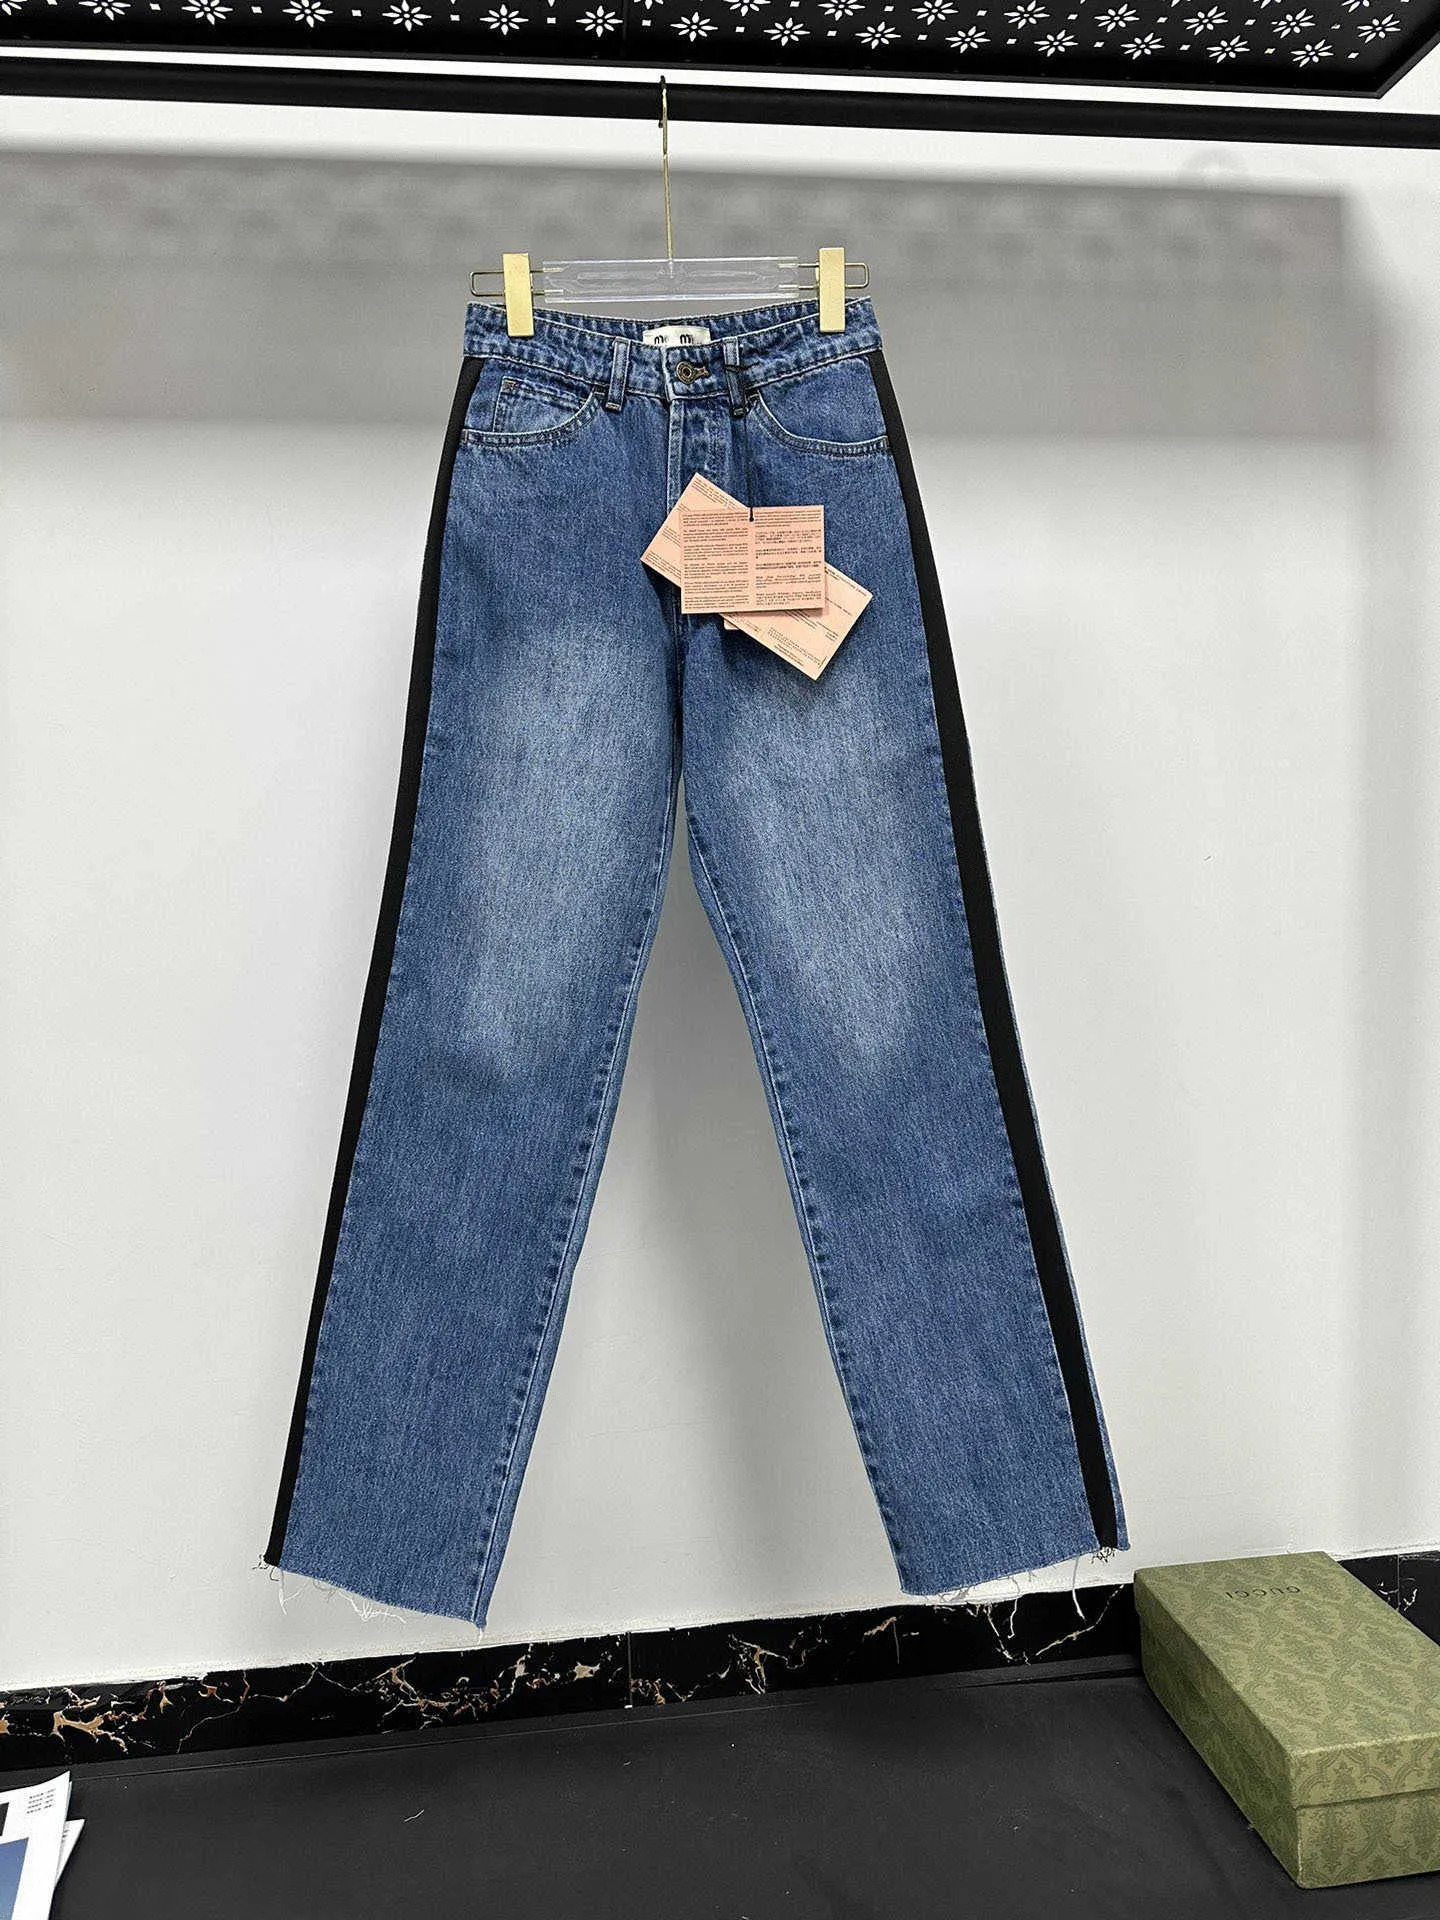 Jeans feminino Vers￣o 23 Novo Patch Patch Patch Patchwork Hair Bichants Straight perna jeans Mulheres